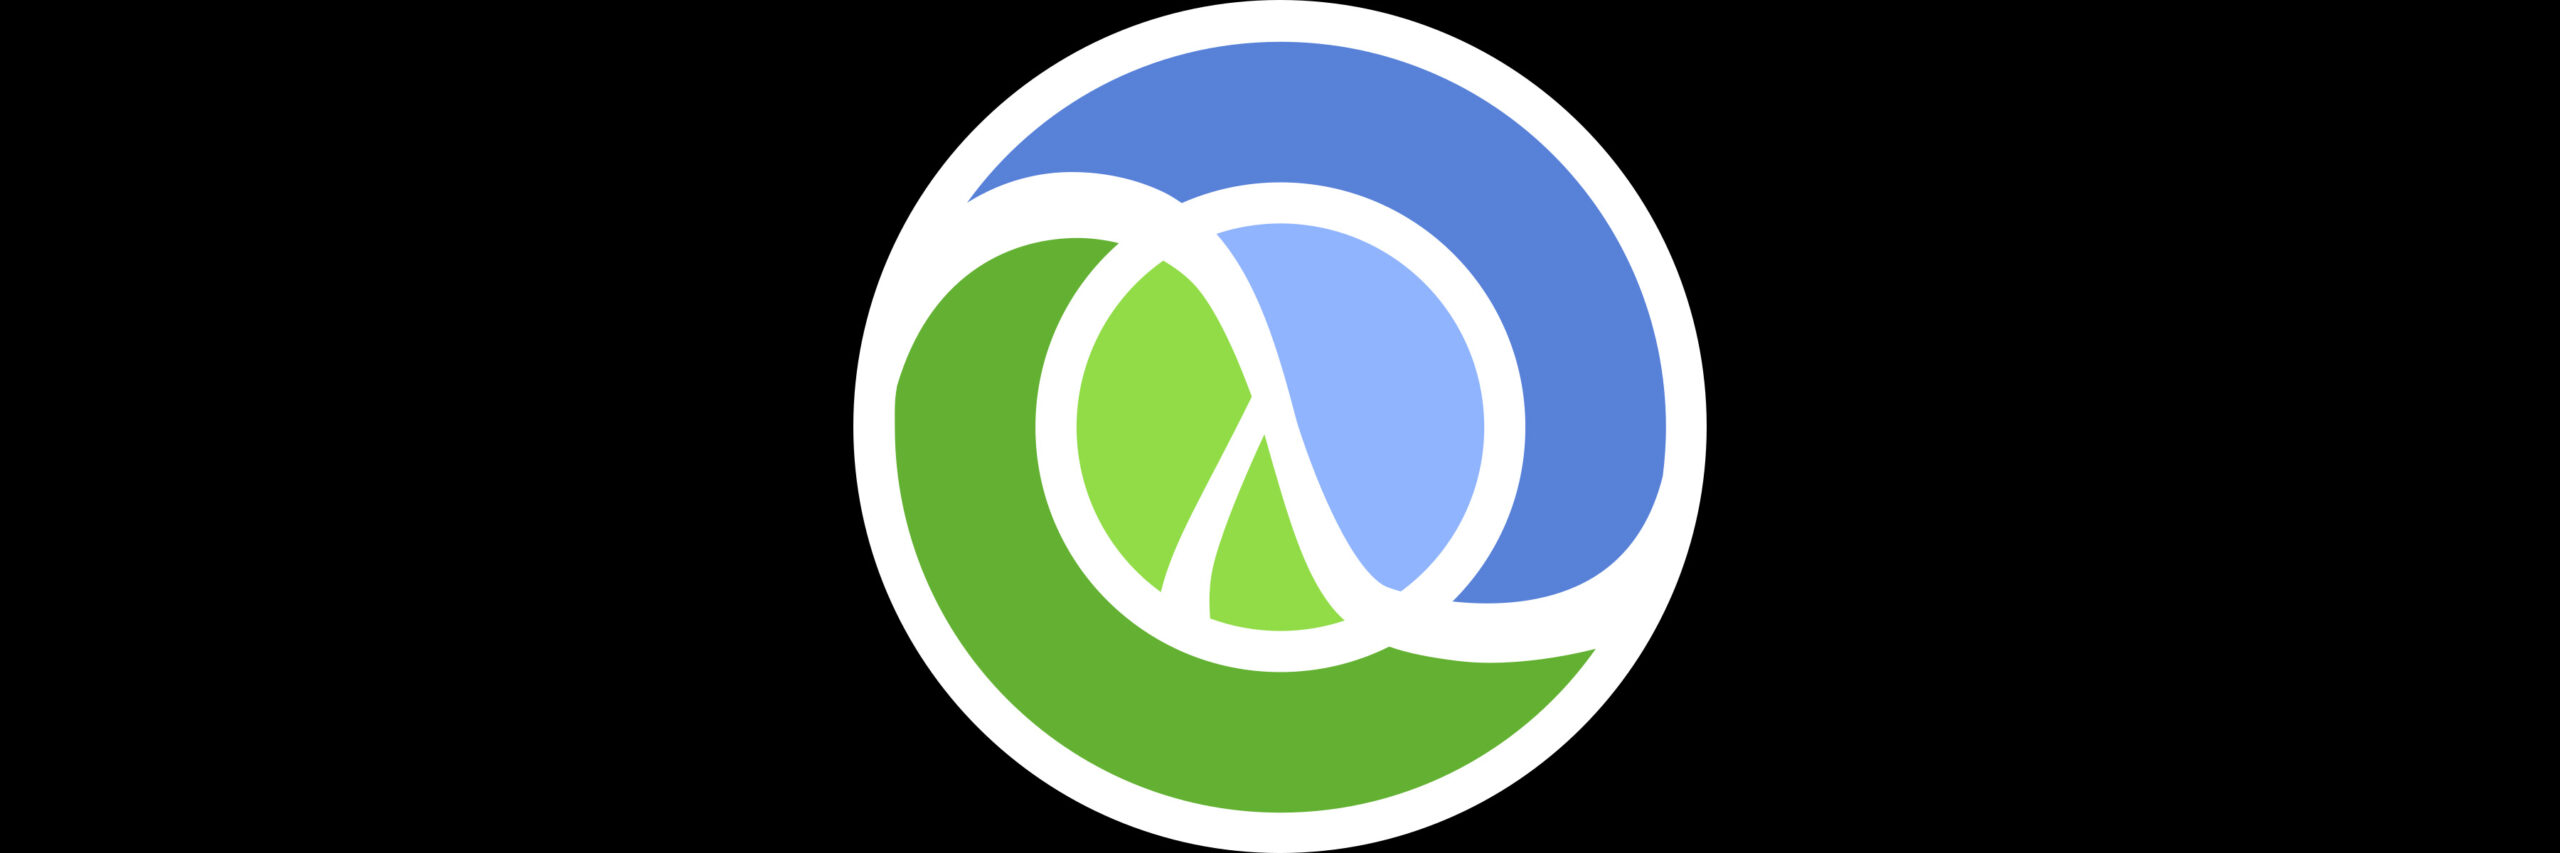 The Official Symbol for the Clojure coding language.